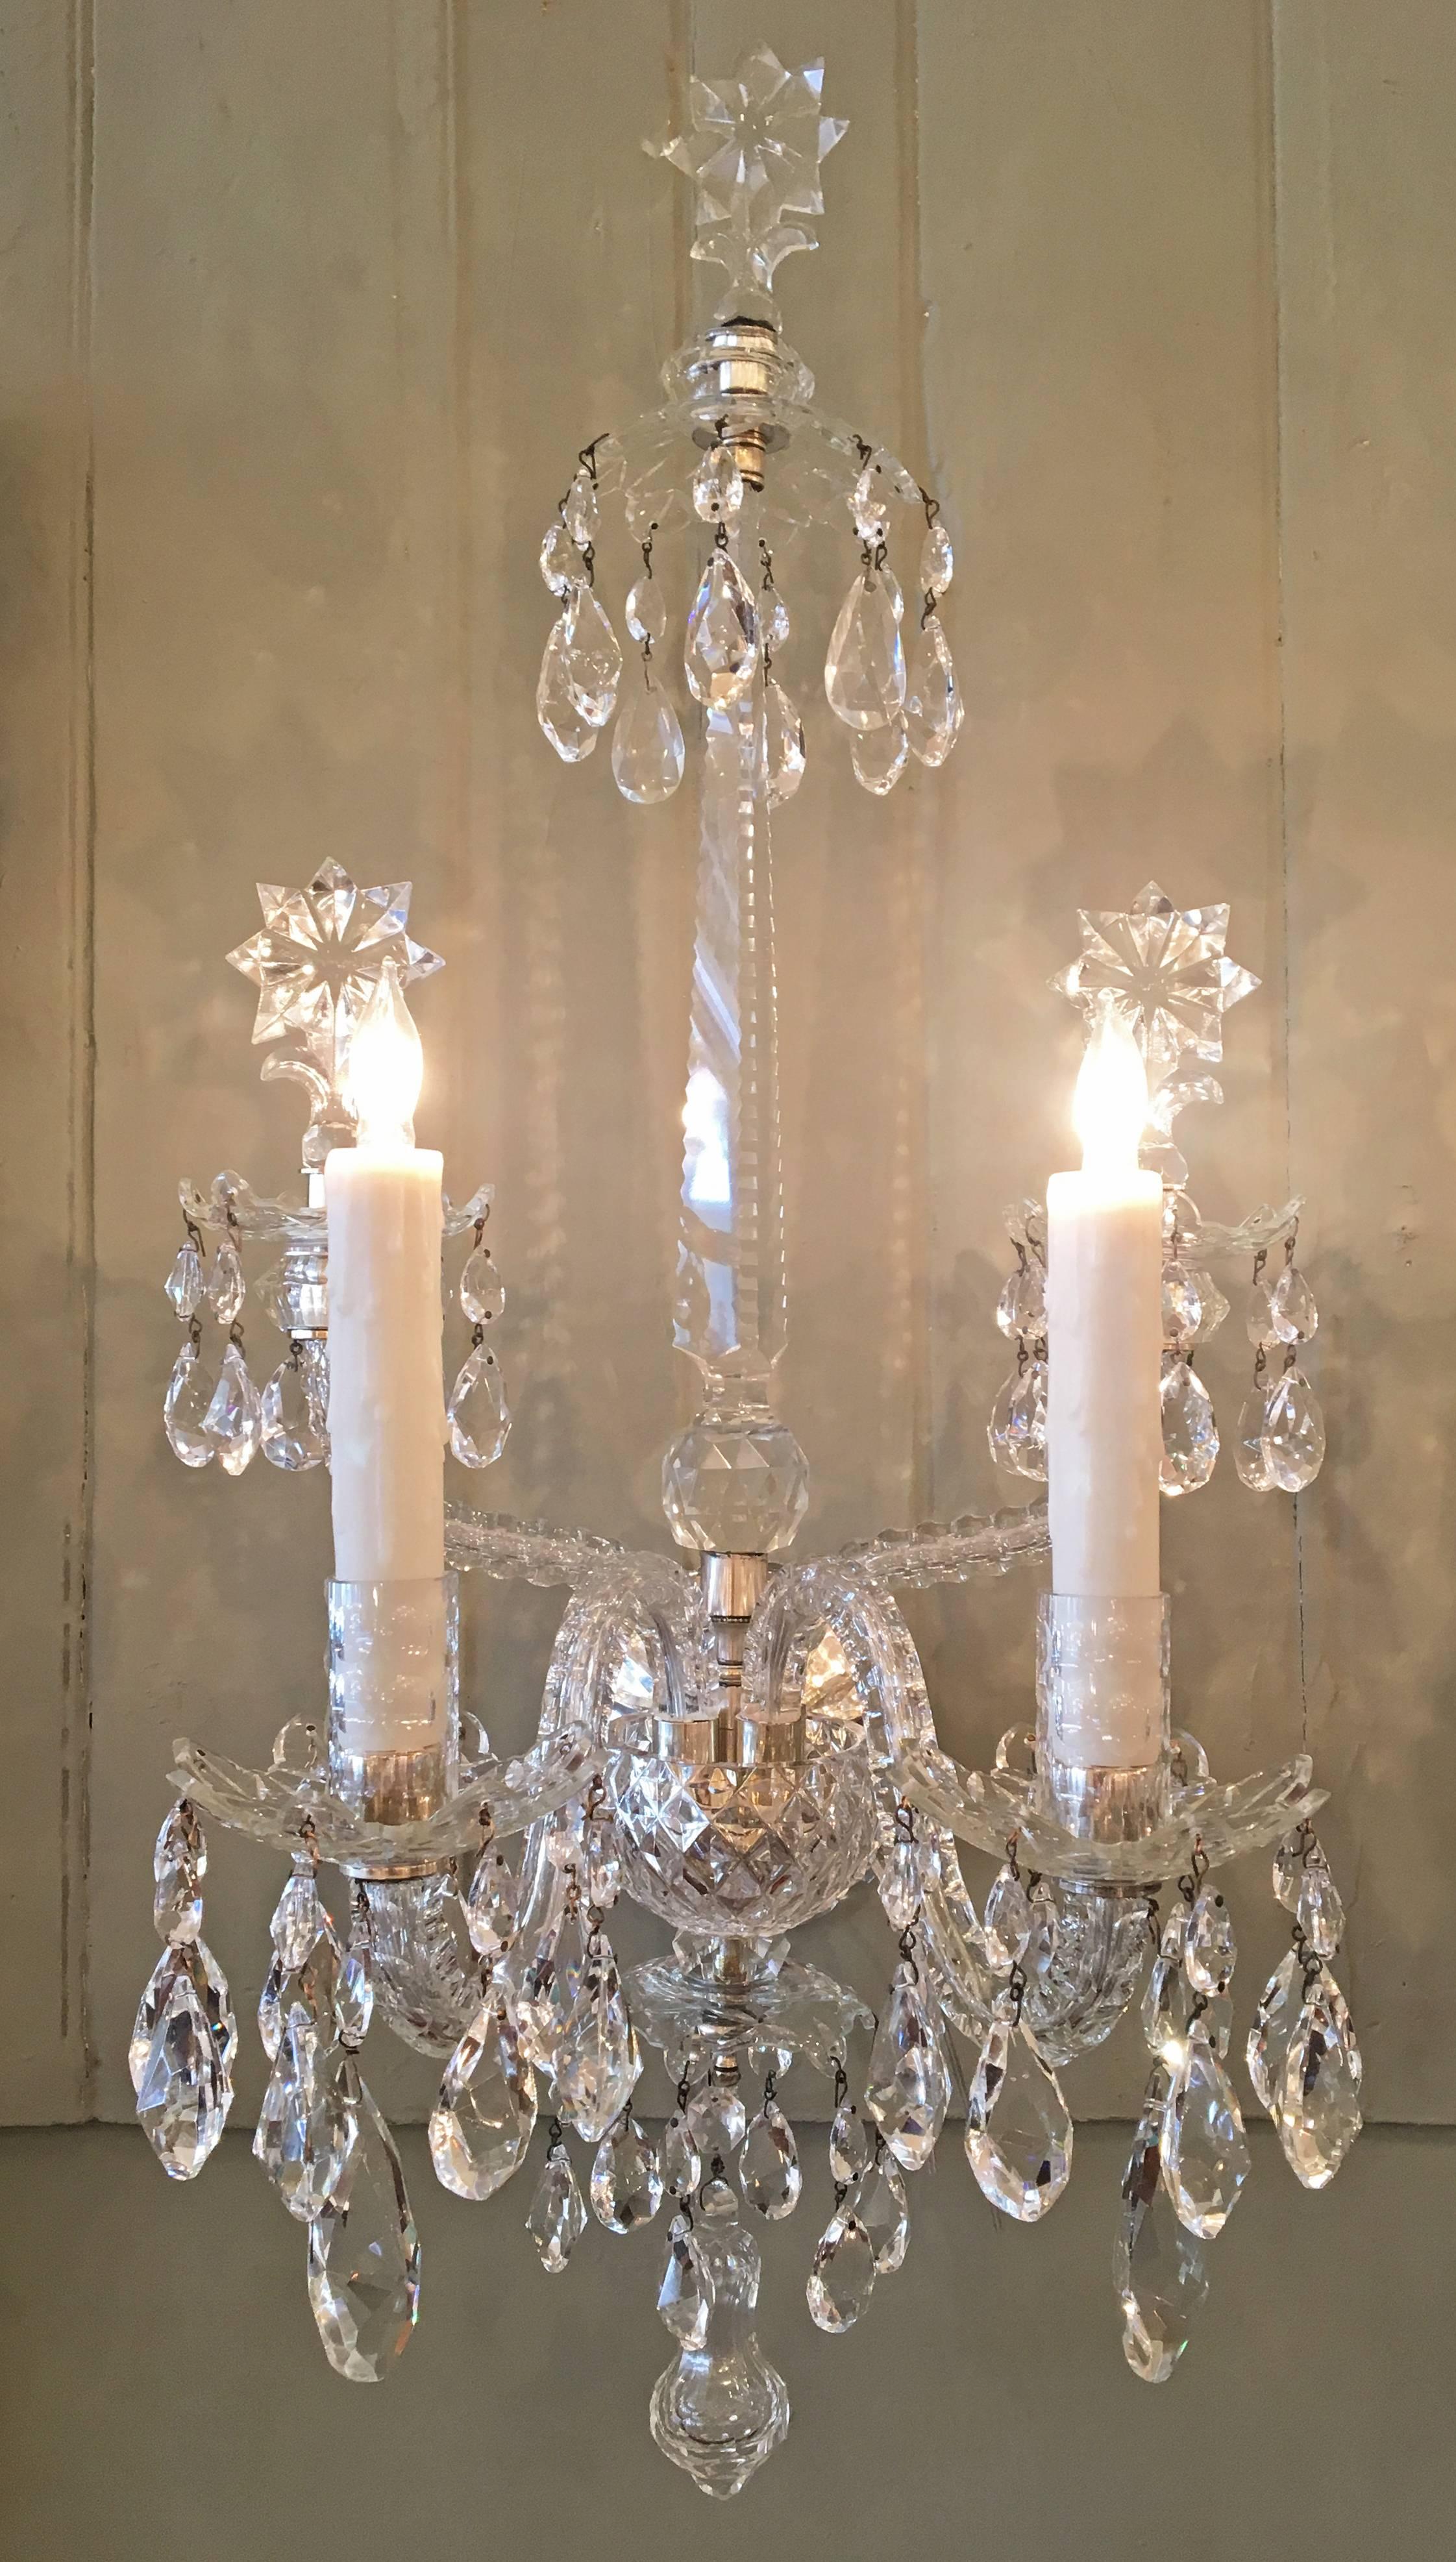 George II style, turn of the century, Anglo Irish crystal sconces. Made of lead crystal with silver mounts.

